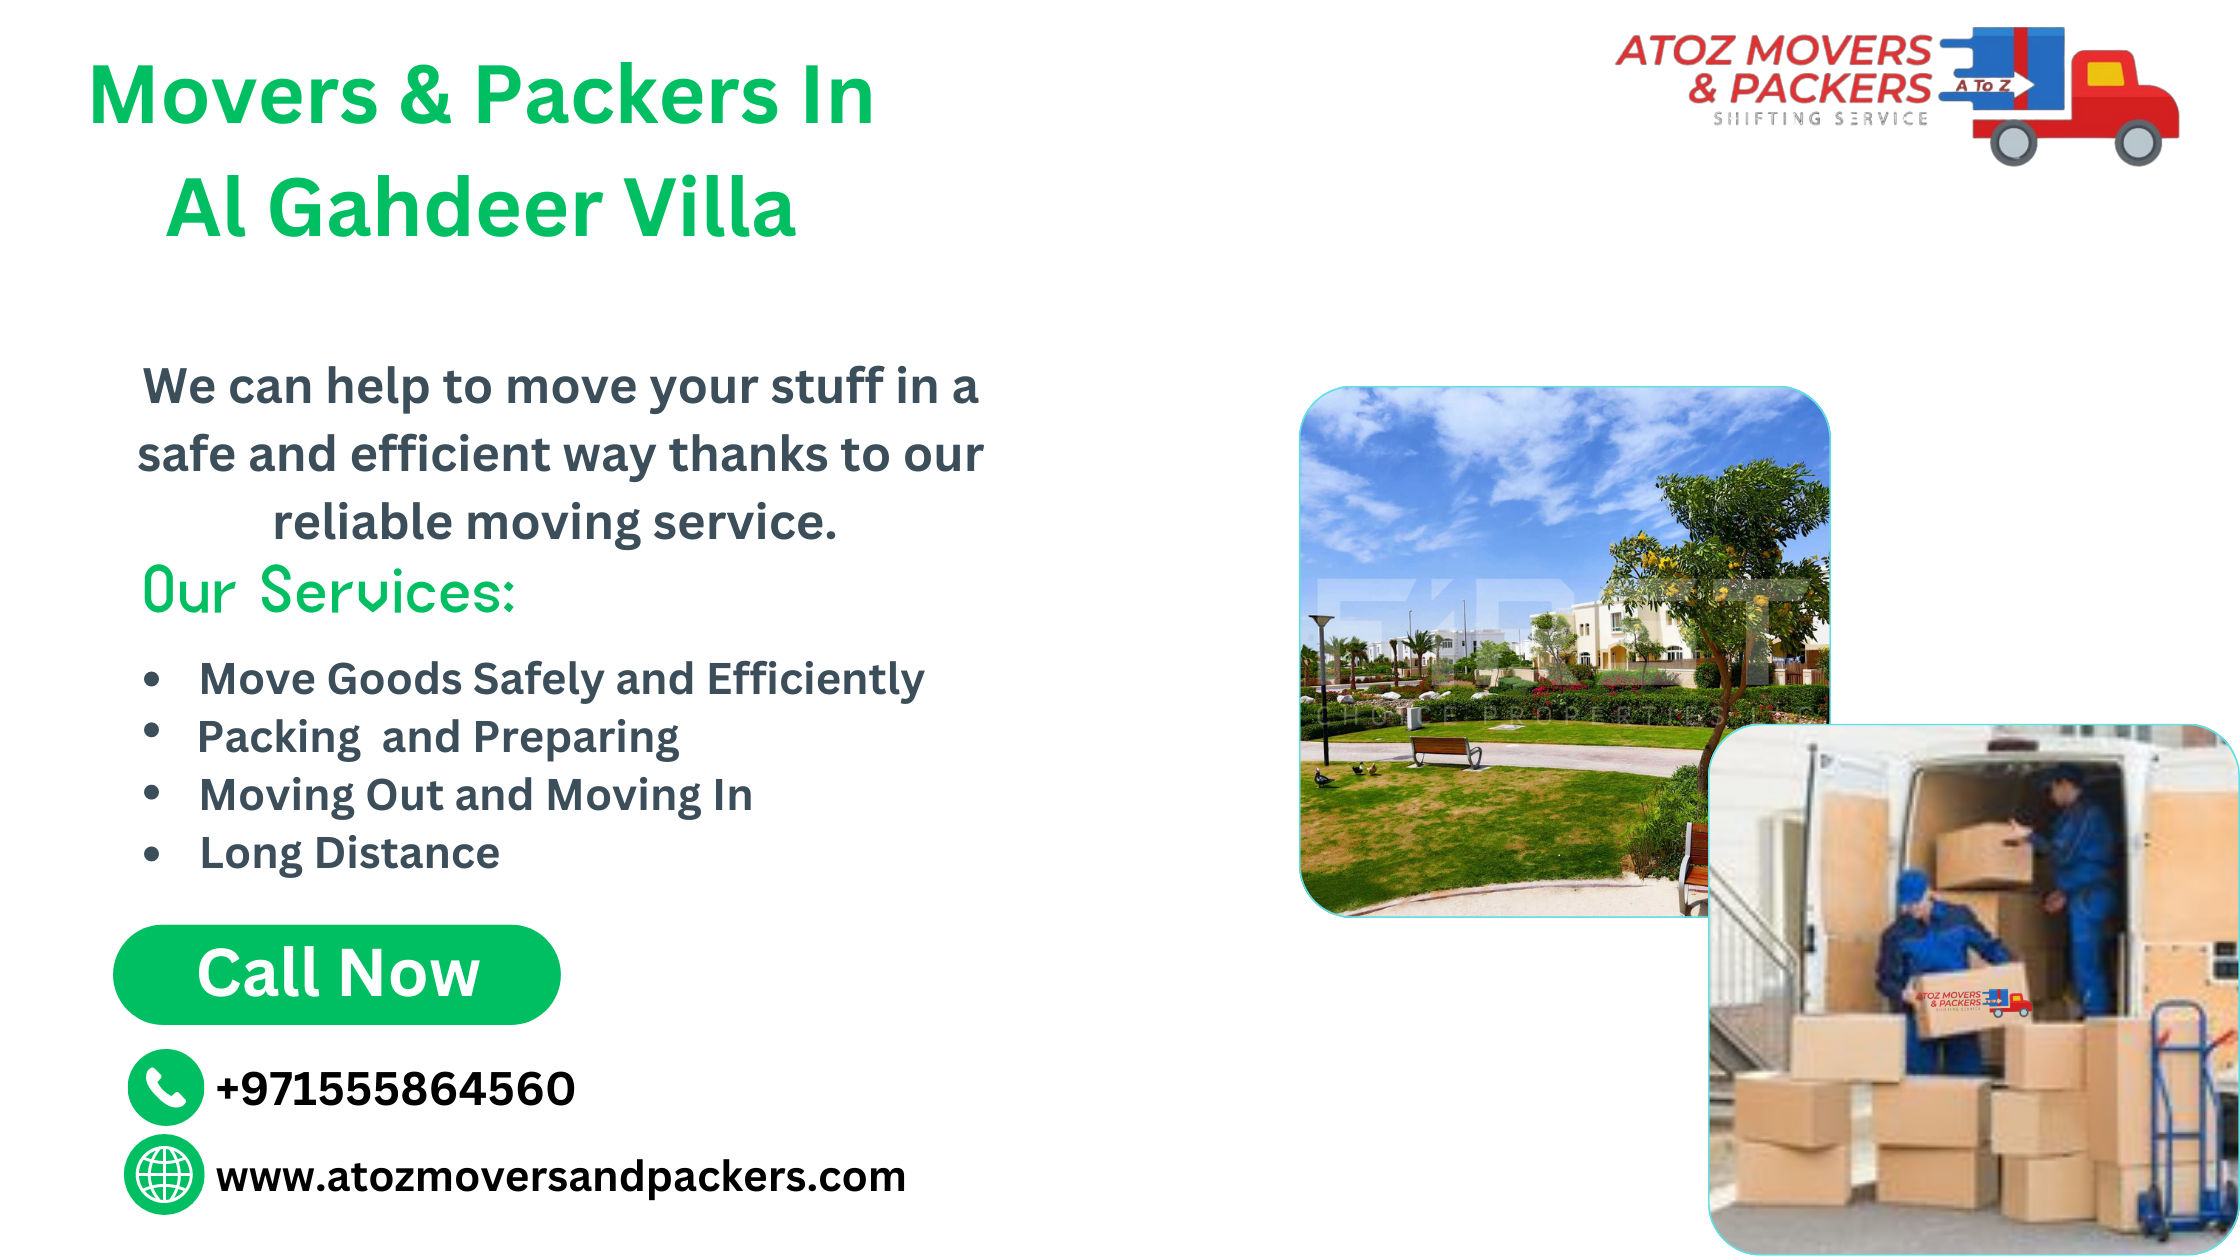 Movers and Packers in Al Ghadeer